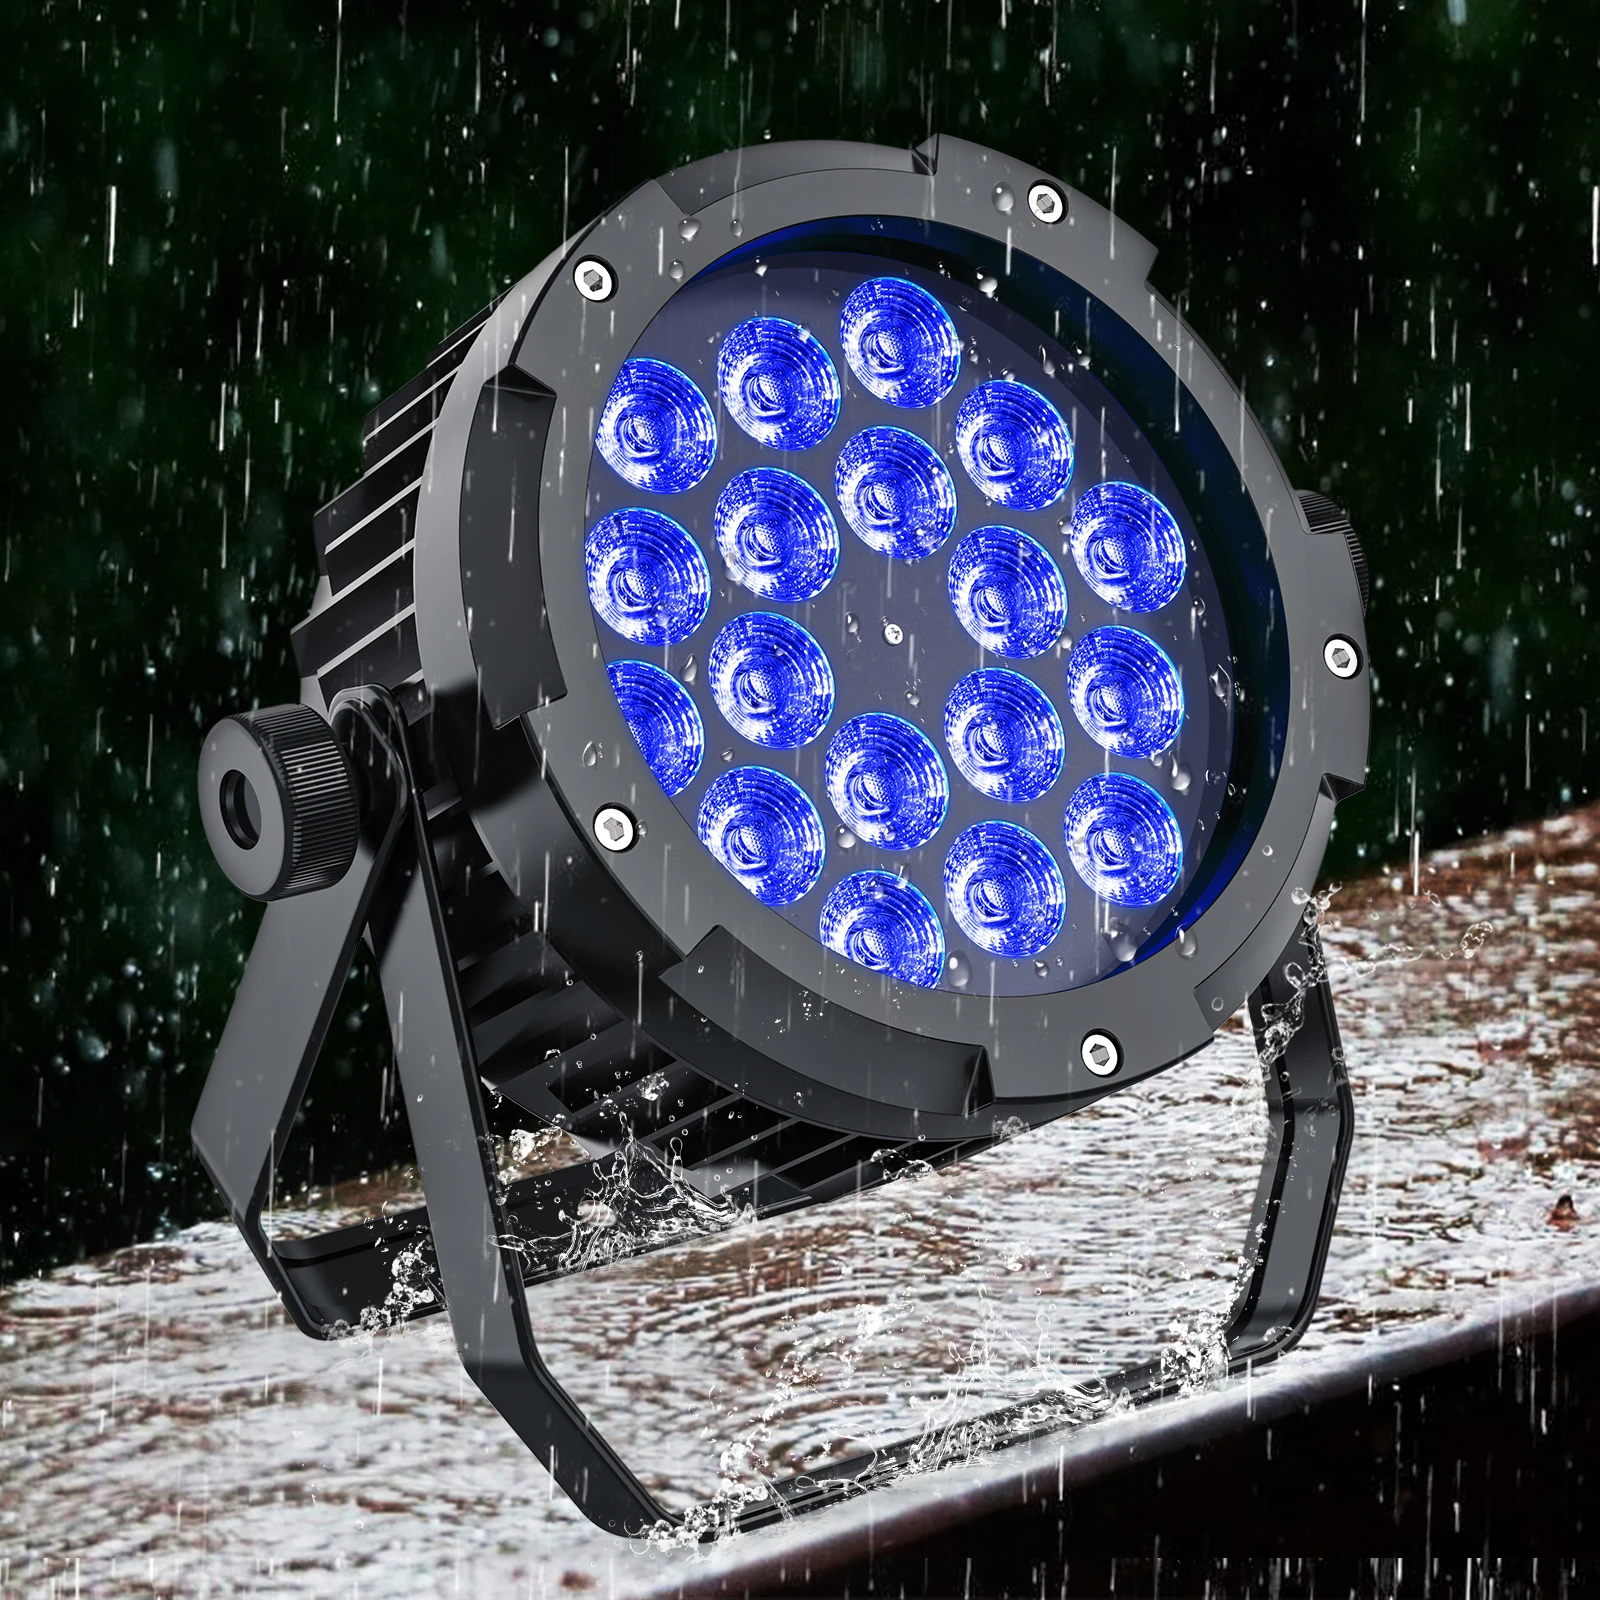 

150W LED Par Lights 18 RGBWA+UV Waterproof 6 in 1 Stage Light with Sound and DMX Control HOLDLAMP Disco Dance Hall Party Bar